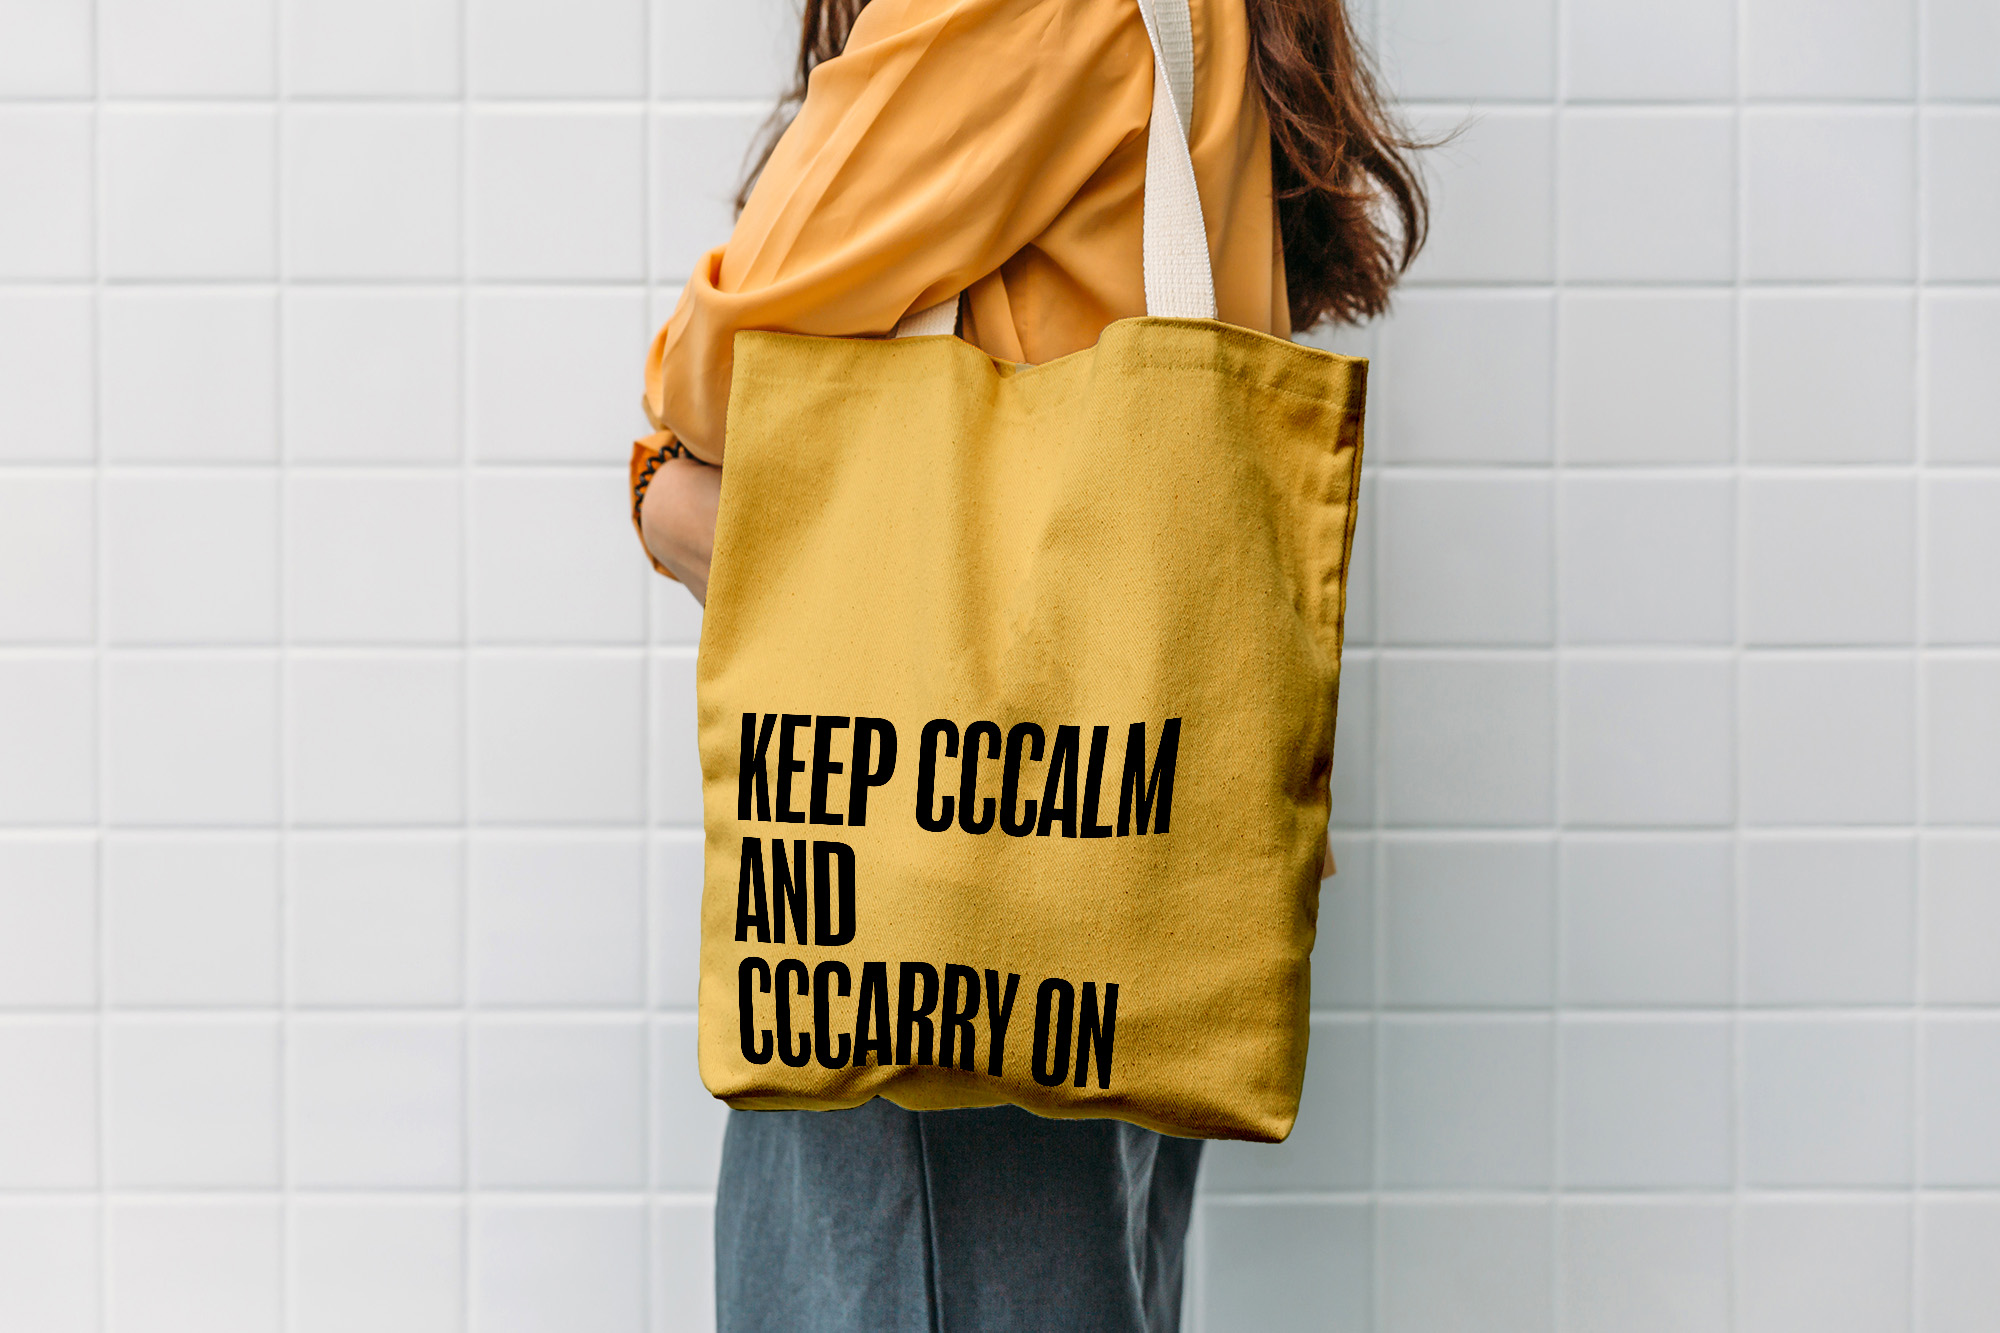 A tote bag, with the copy 'Keep cccalm and cccarry on' applied - linking a phrase used towards those who stutter and the function of the bag.